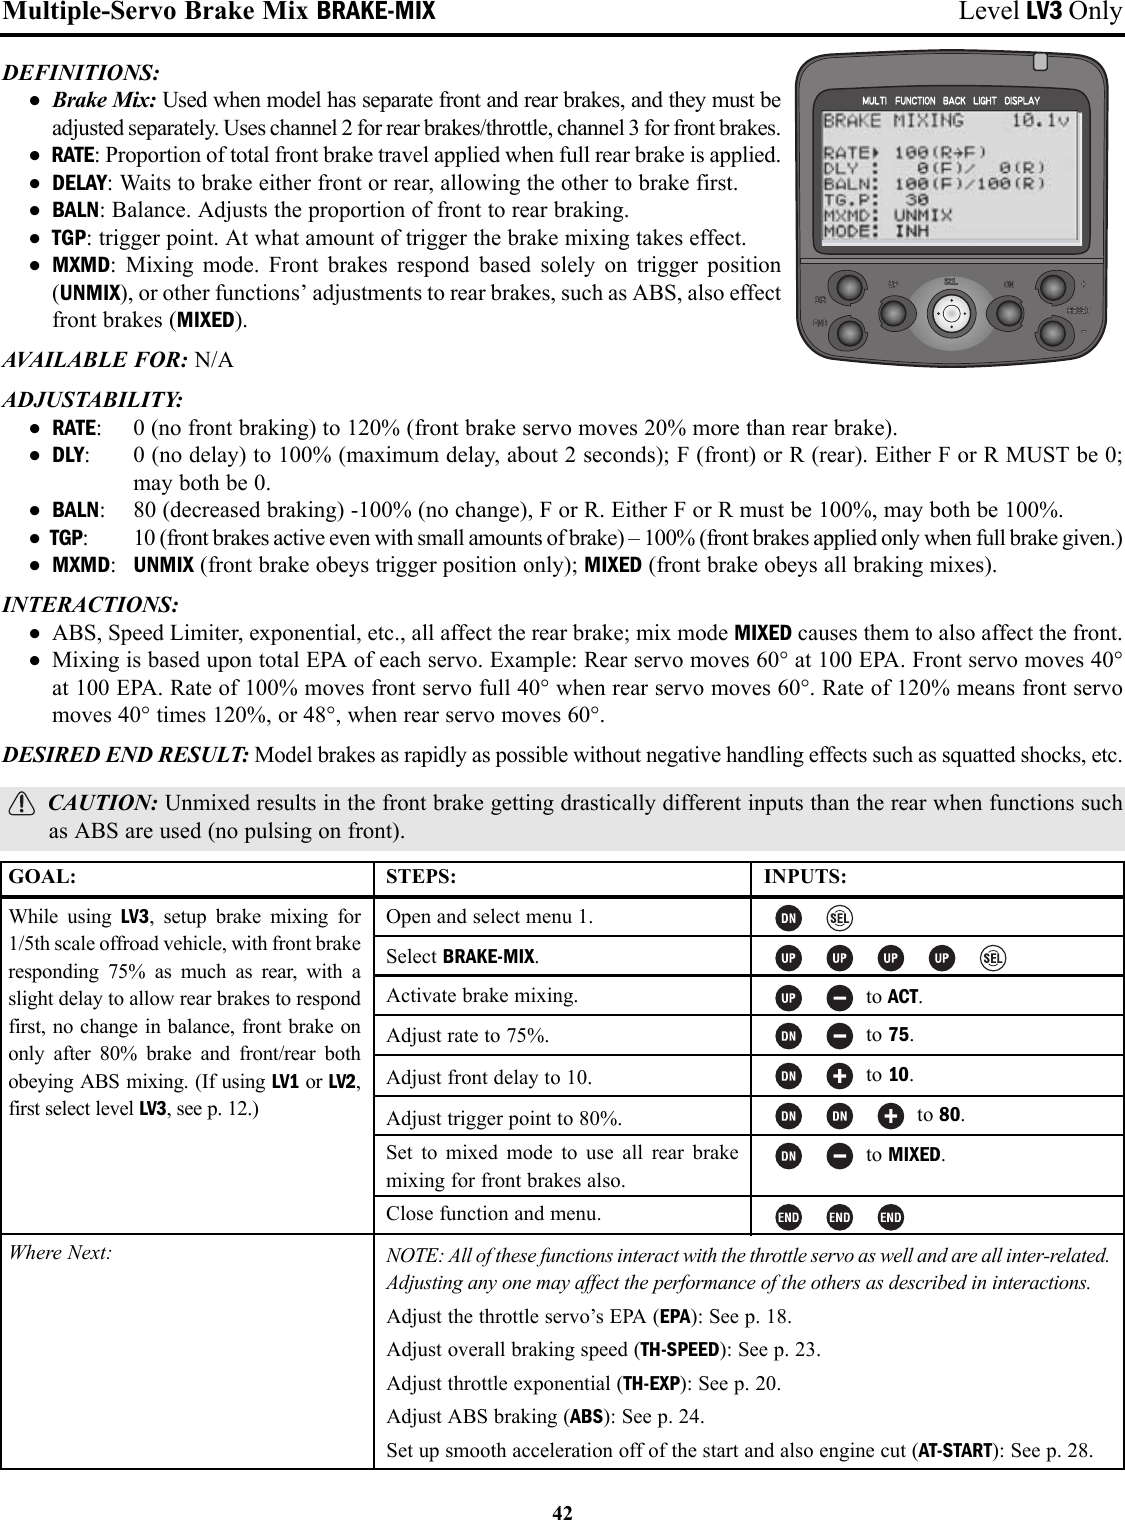 Multiple-Servo Brake Mix BRAKE-MIX Level LV3 OnlyDEFINITIONS:• Brake Mix: Used when model has separate front and rear brakes, and they must beadjusted separately. Uses channel 2 for rear brakes/throttle, channel 3 for front brakes.• RATE: Proportion of total front brake travel applied when full rear brake is applied.• DELAY: Waits to brake either front or rear, allowing the other to brake first.• BALN: Balance. Adjusts the proportion of front to rear braking.• TGP: trigger point. At what amount of trigger the brake mixing takes effect.• MXMD: Mixing mode. Front brakes respond based solely on trigger position(UNMIX), or other functions’ adjustments to rear brakes, such as ABS, also effectfront brakes (MIXED).AVAILABLE FOR: N/AADJUSTABILITY: • RATE: 0 (no front braking) to 120% (front brake servo moves 20% more than rear brake).• DLY: 0 (no delay) to 100% (maximum delay, about 2 seconds); F (front) or R (rear). Either F or R MUST be 0;may both be 0.• BALN: 80 (decreased braking) -100% (no change), F or R. Either F or R must be 100%, may both be 100%.• TGP: 10 (front brakes active even with small amounts of brake) – 100% (front brakes applied only when full brake given.)• MXMD:UNMIX (front brake obeys trigger position only); MIXED (front brake obeys all braking mixes).INTERACTIONS:• ABS, Speed Limiter, exponential, etc., all affect the rear brake; mix mode MIXED causes them to also affect the front.• Mixing is based upon total EPA of each servo. Example: Rear servo moves 60° at 100 EPA. Front servo moves 40°at 100 EPA. Rate of 100% moves front servo full 40° when rear servo moves 60°. Rate of 120% means front servomoves 40° times 120%, or 48°, when rear servo moves 60°.DESIRED END RESULT: Model brakes as rapidly as possible without negative handling effects such as squatted shocks, etc.CAUTION: Unmixed results in the front brake getting drastically different inputs than the rear when functions suchas ABS are used (no pulsing on front).42GOAL:While using LV3, setup brake mixing for1/5th scale offroad vehicle, with front brakeresponding 75% as much as rear, with aslight delay to allow rear brakes to respondfirst, no change in balance, front brake ononly after 80% brake and front/rear bothobeying ABS mixing. (If using LV1 or LV2,first select level LV3, see p. 12.)Where Next:STEPS:Open and select menu 1.Select BRAKE-MIX.Activate brake mixing.Adjust rate to 75%.Adjust front delay to 10.Adjust trigger point to 80%.Set to mixed mode to use all rear brakemixing for front brakes also.Close function and menu.INPUTS:to ACT.to 75.to 10.to 80.to MIXED.NOTE: All of these functions interact with the throttle servo as well and are all inter-related.Adjusting any one may affect the performance of the others as described in interactions.Adjust the throttle servo’s EPA (EPA): See p. 18.Adjust overall braking speed (TH-SPEED): See p. 23.Adjust throttle exponential (TH-EXP): See p. 20.Adjust ABS braking (ABS): See p. 24.Set up smooth acceleration off of the start and also engine cut (AT-START): See p. 28.